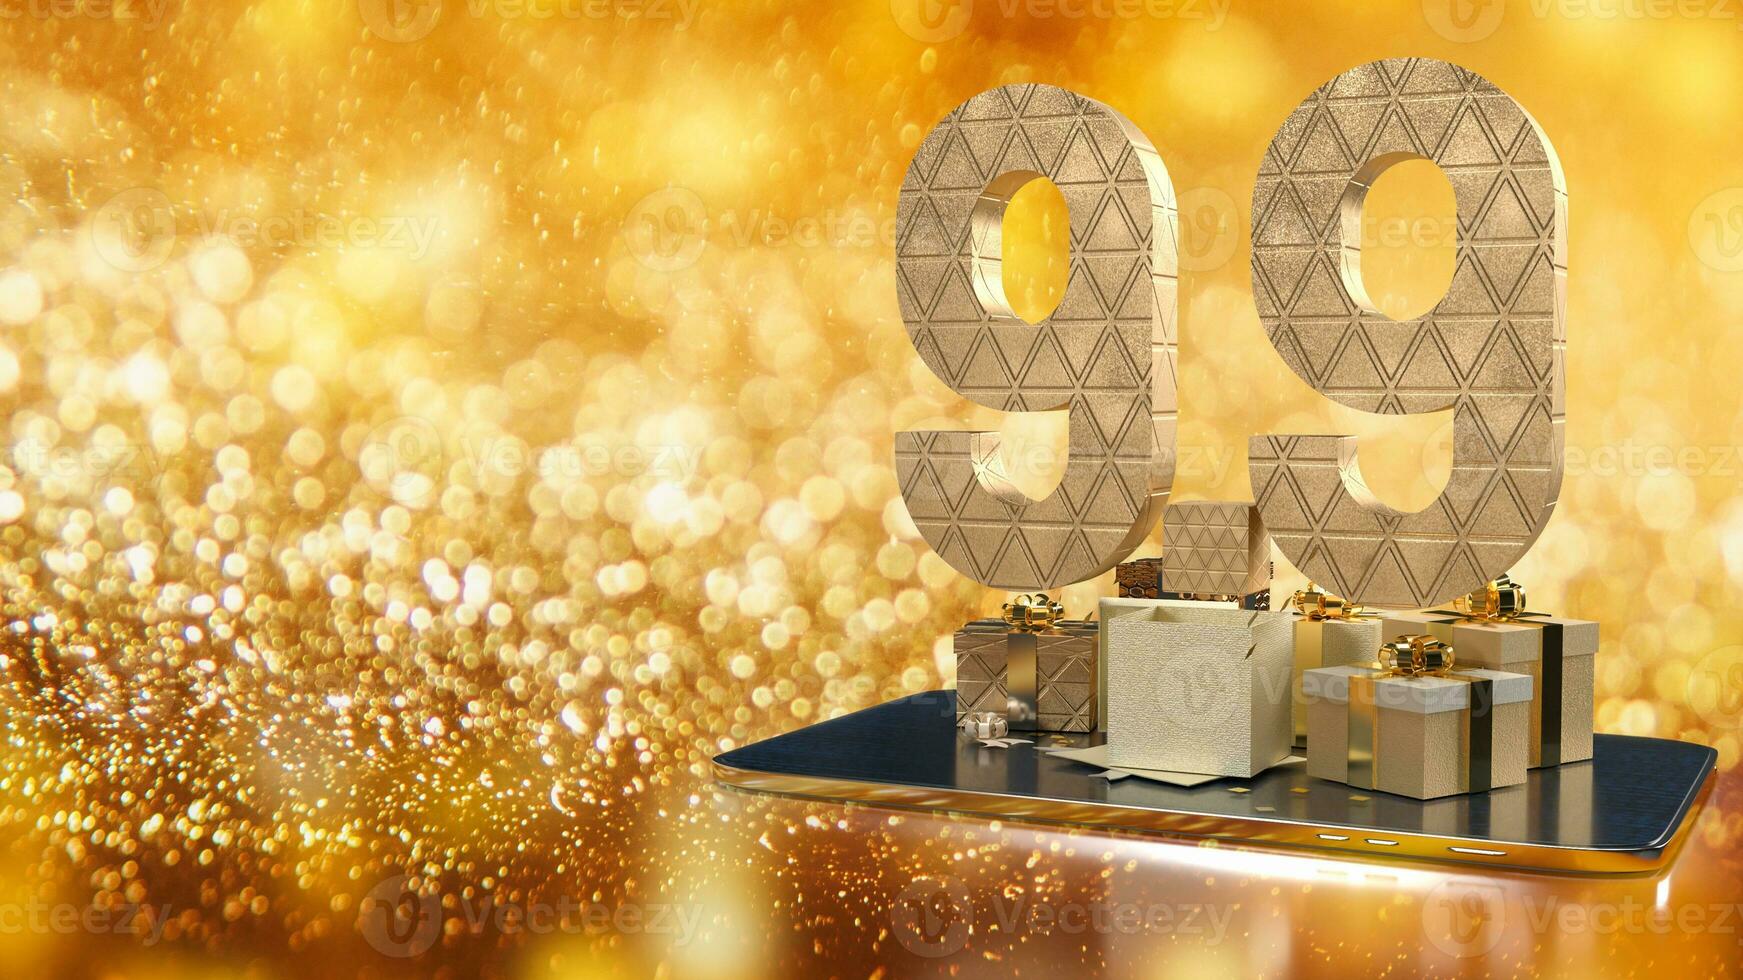 The 9.9 number gold on tablet  background for sale or promotion concept 3d rendering photo